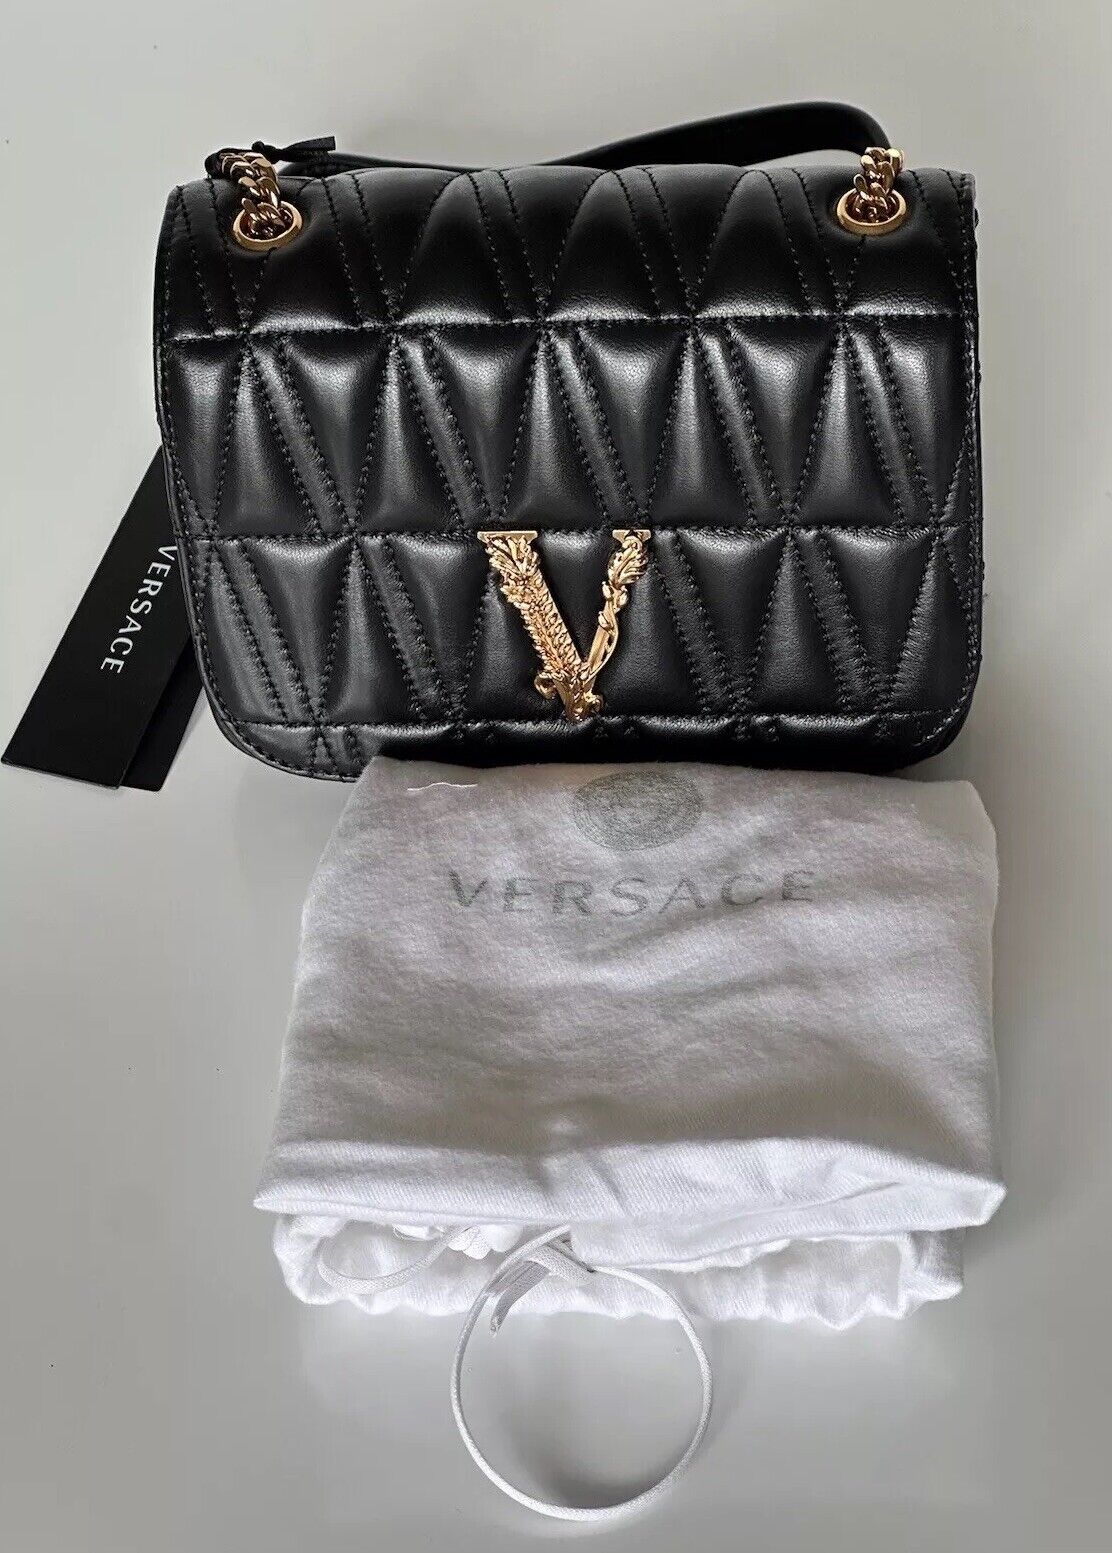 NWT $1925 Versace Virtus Quilted Leather Black Crossbody Shoulder Bag DBFH821 IT